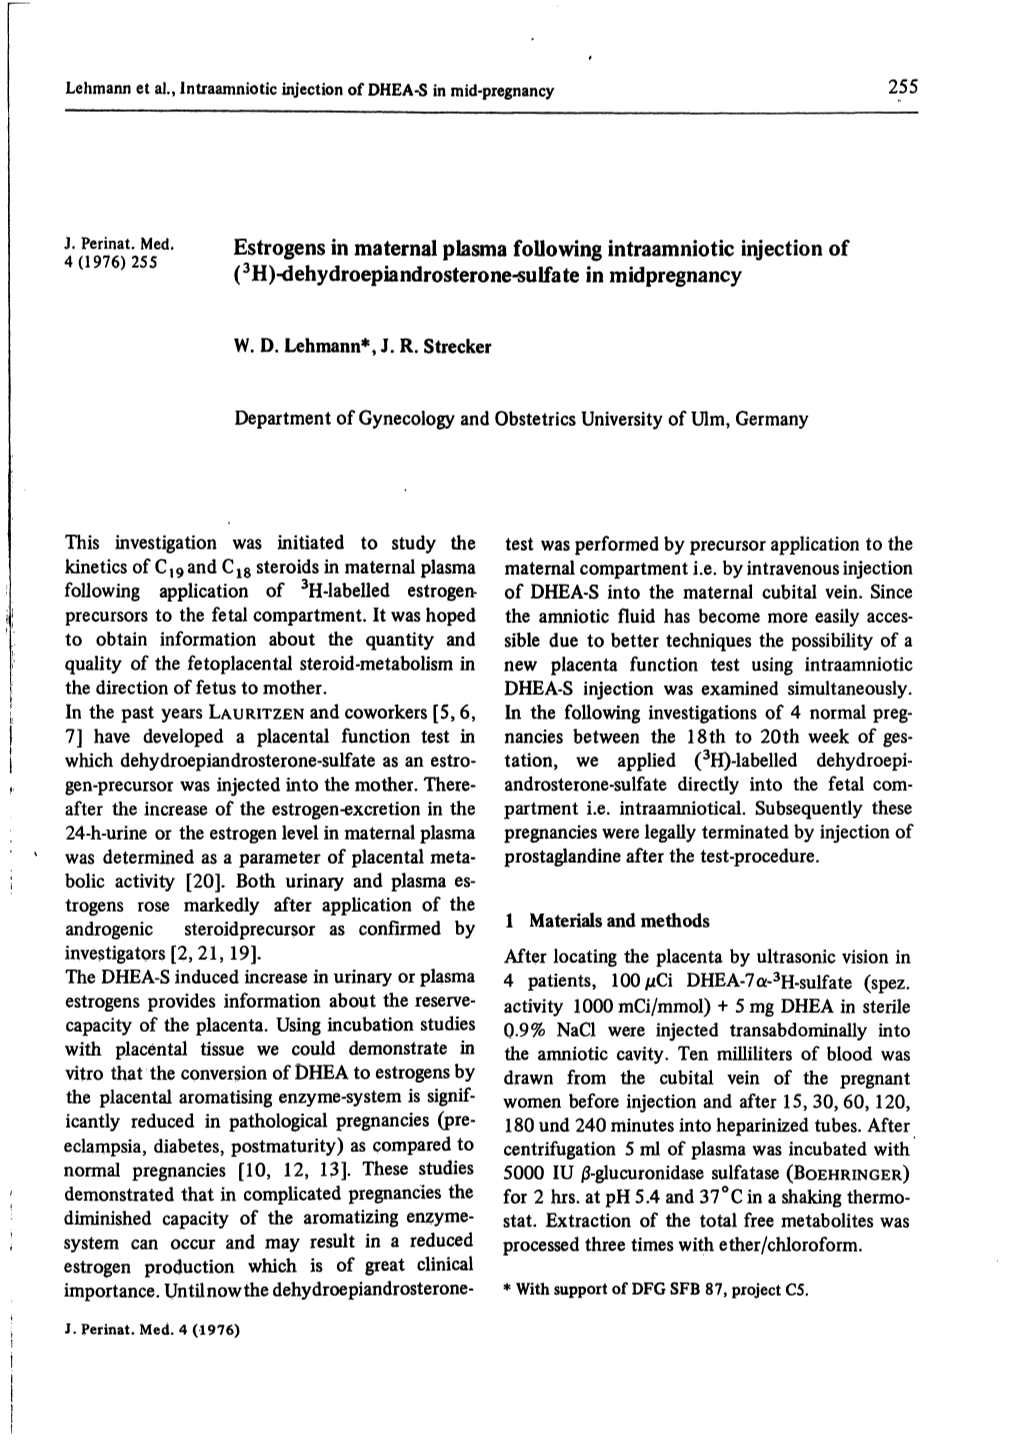 Estrogens in Maternal Plasma Following Intraamniotic Injection of 4(1976)255 (3H)-Dehydroepiandrosterone-Sulfate in Midpregnancy